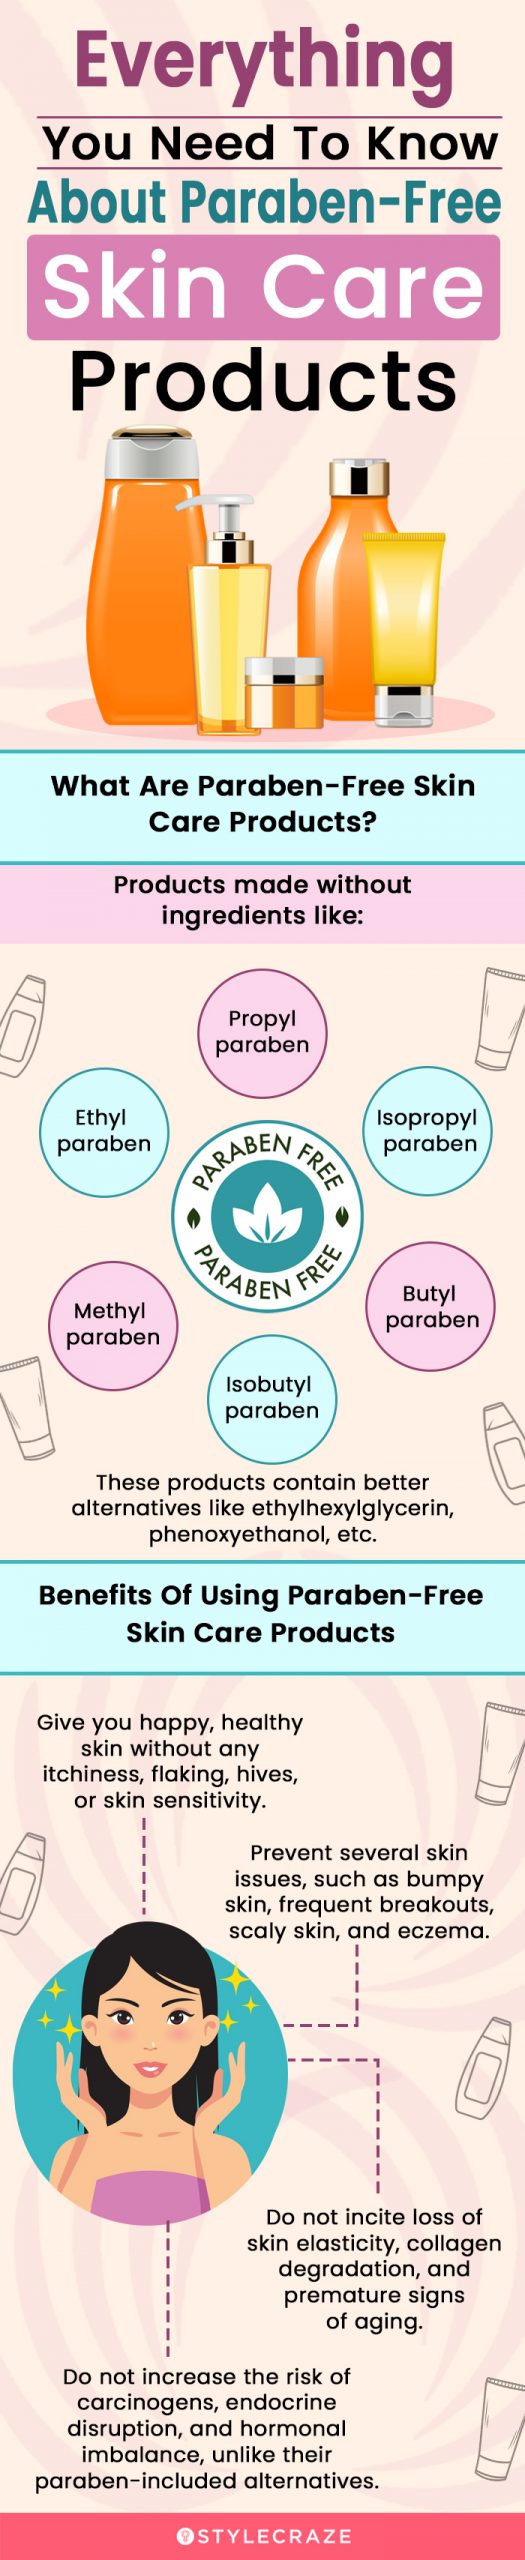 Everything You Need To Know About Paraben-Free Skin Care Products (infographic)